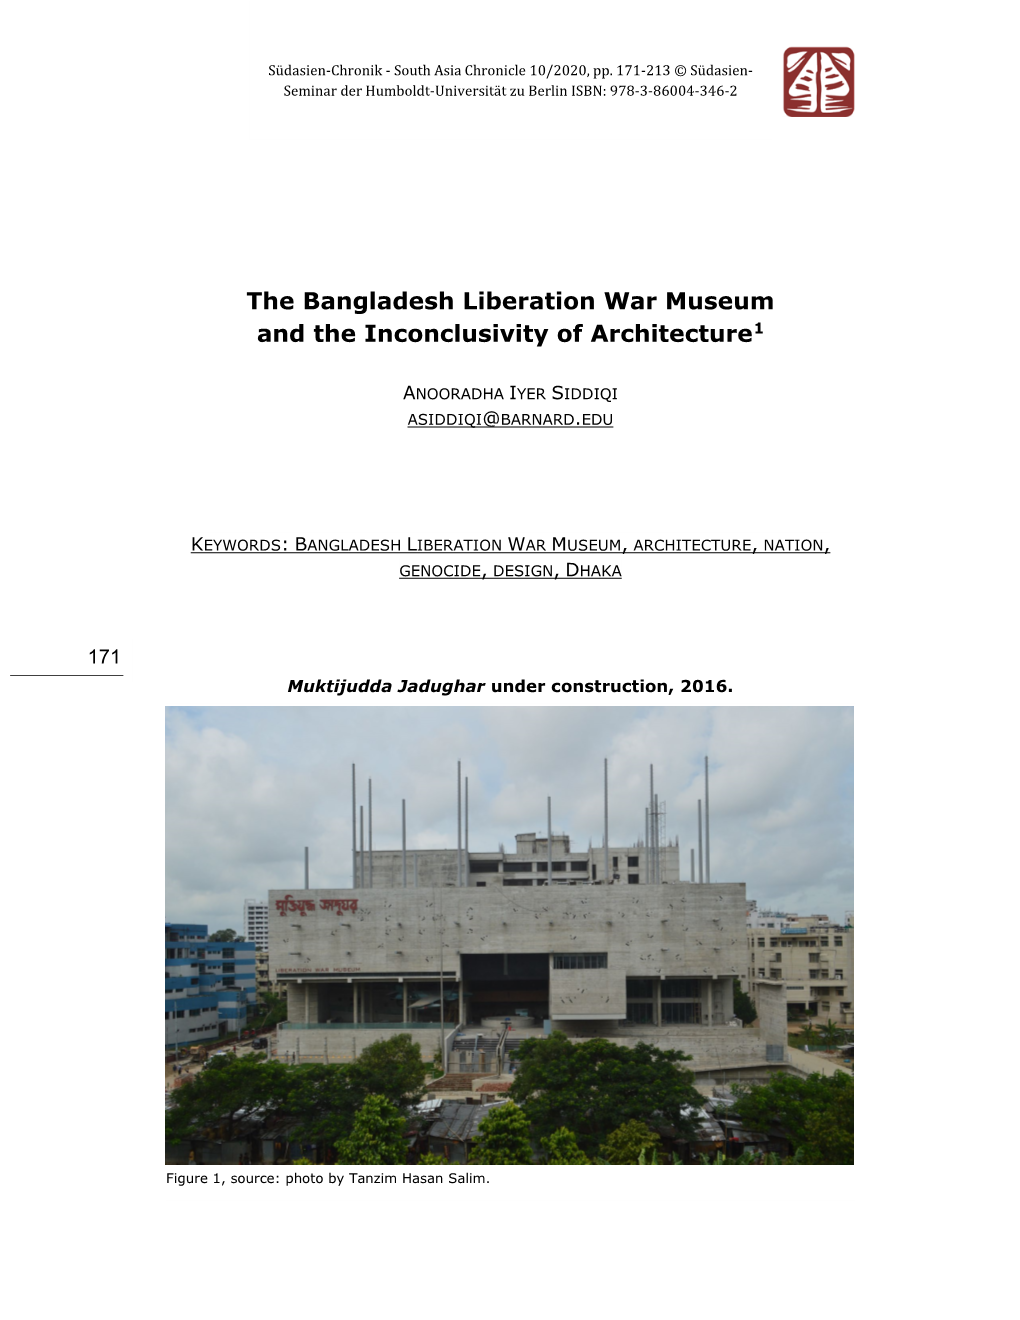 The Bangladesh Liberation War Museum and the Inconclusivity of Architecture1